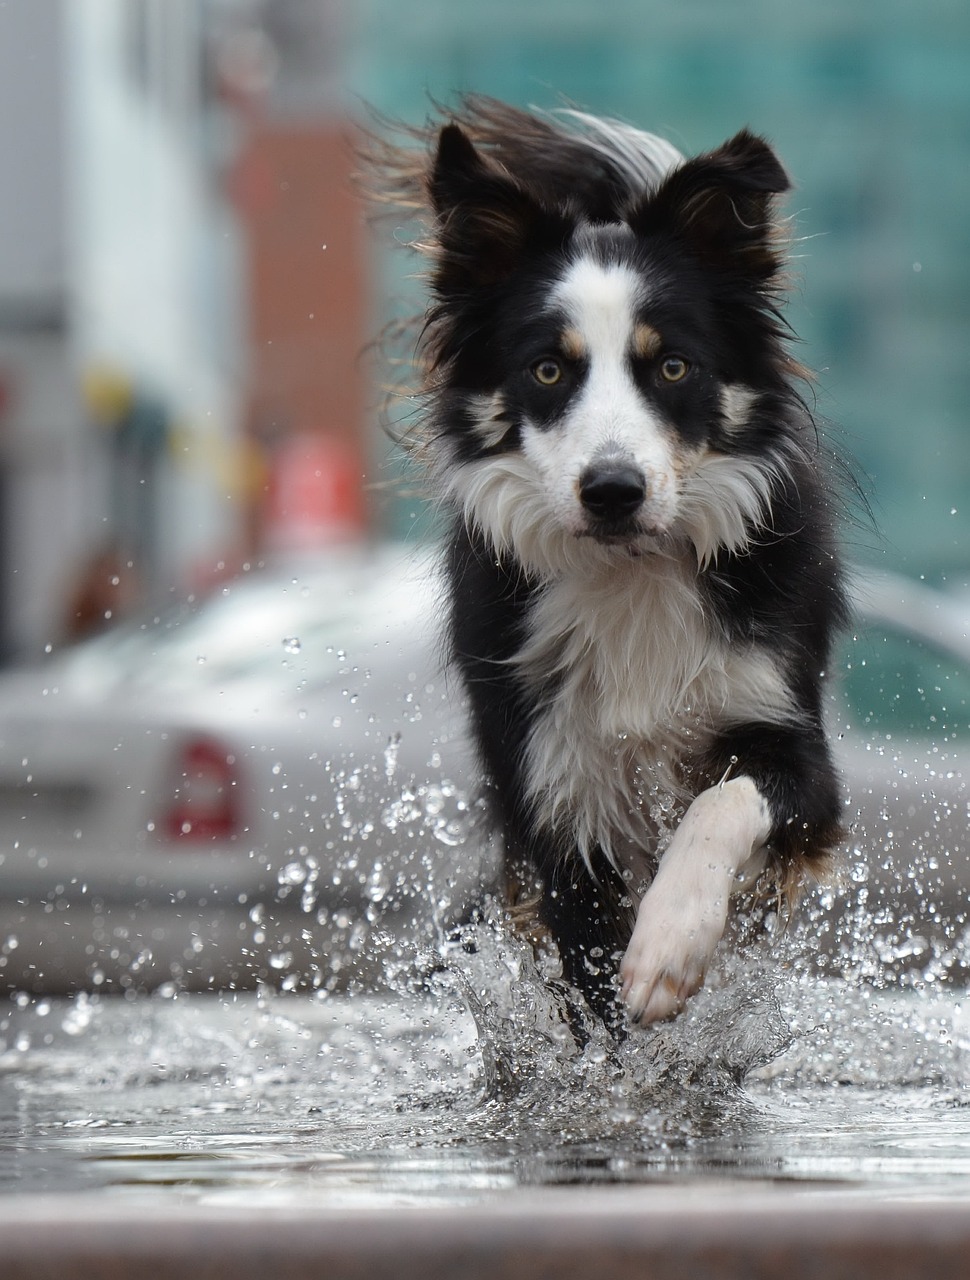 a black and white dog running through a puddle of water, shutterstock, in the city, afp, border collie, high res